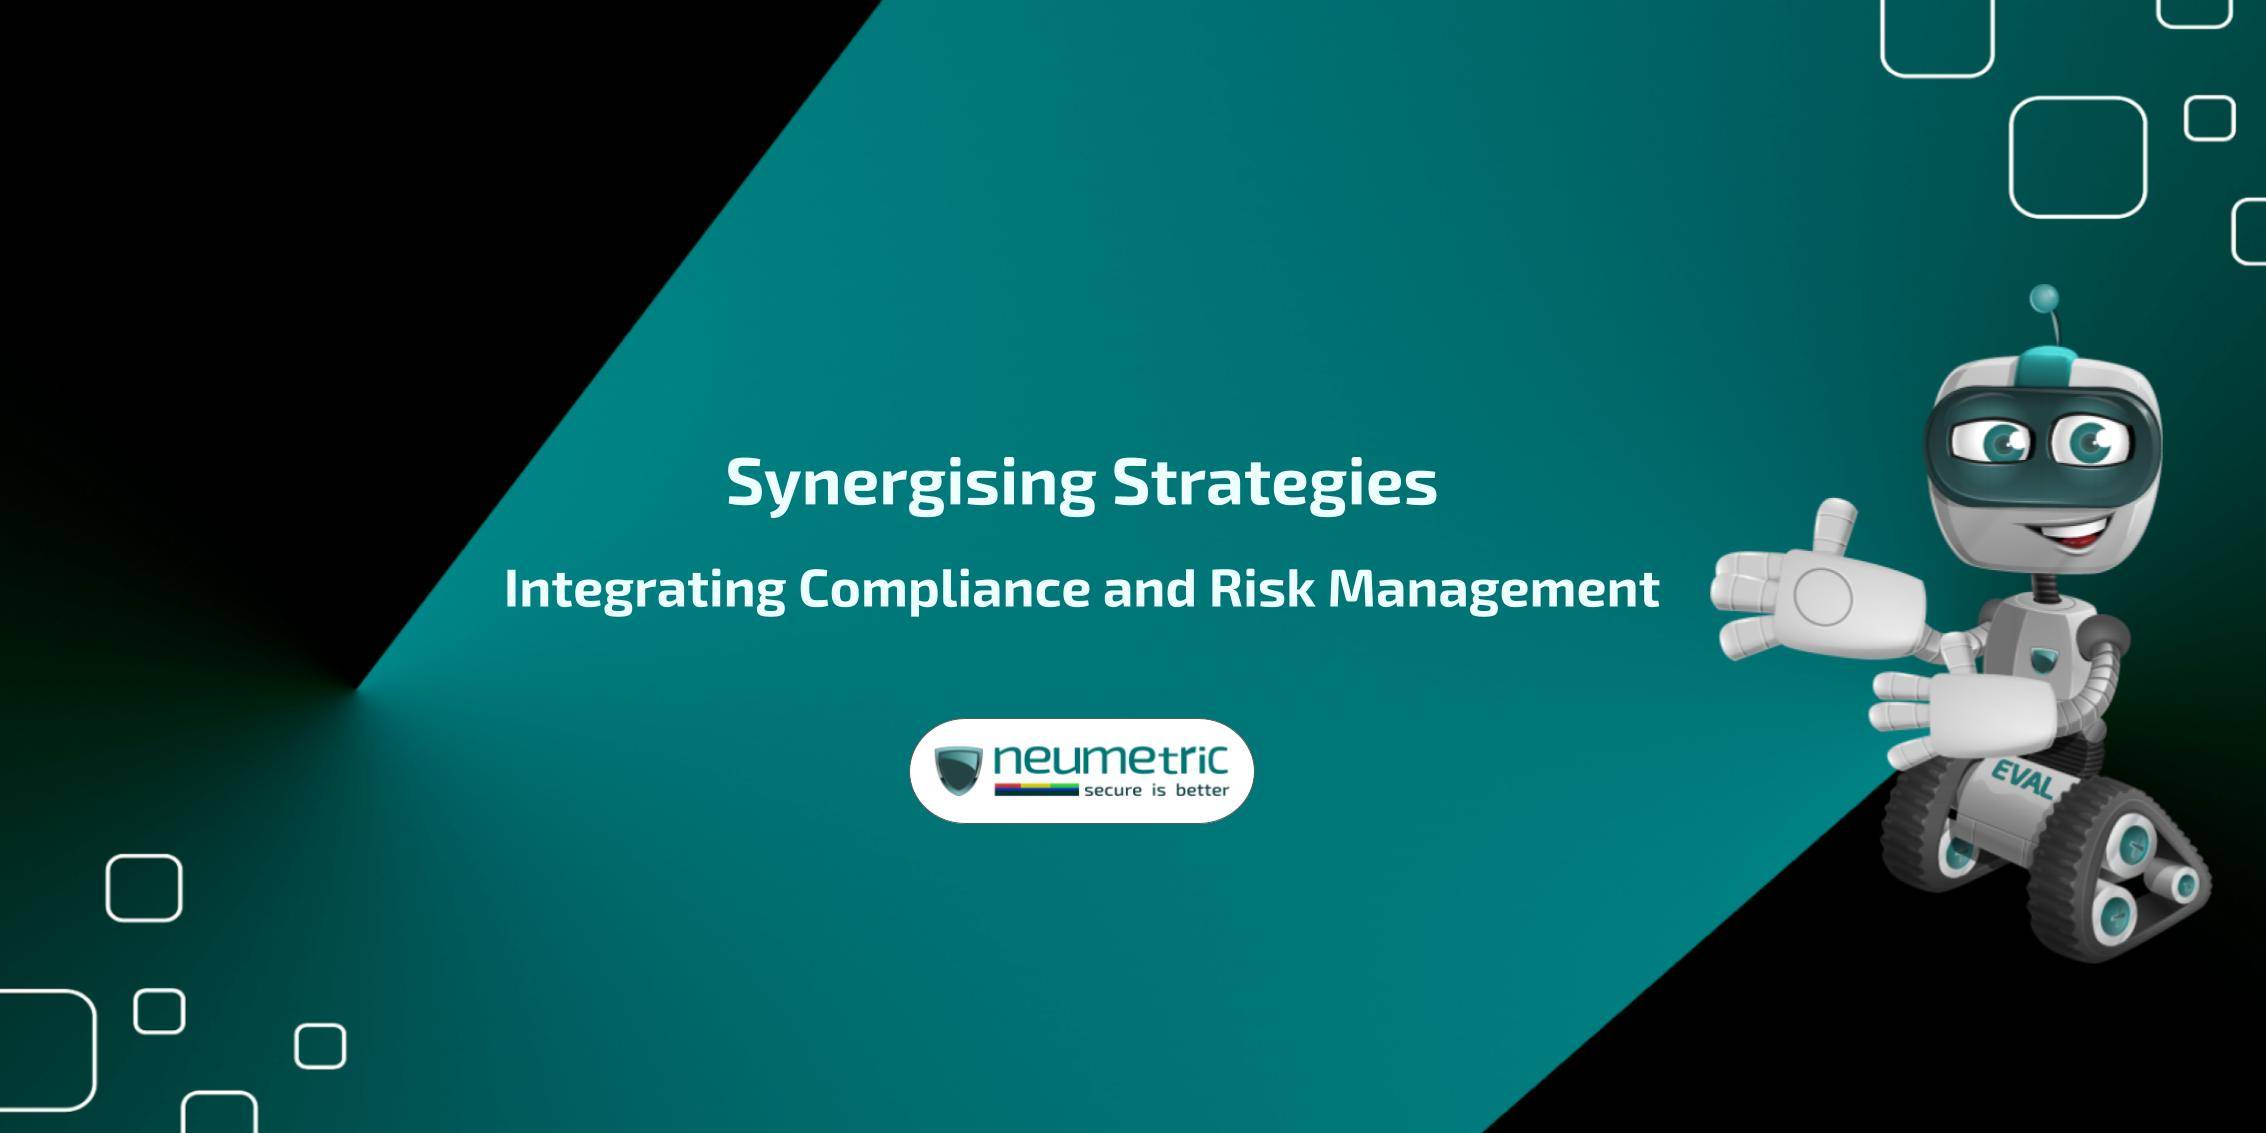 Integrating Compliance and Risk Management